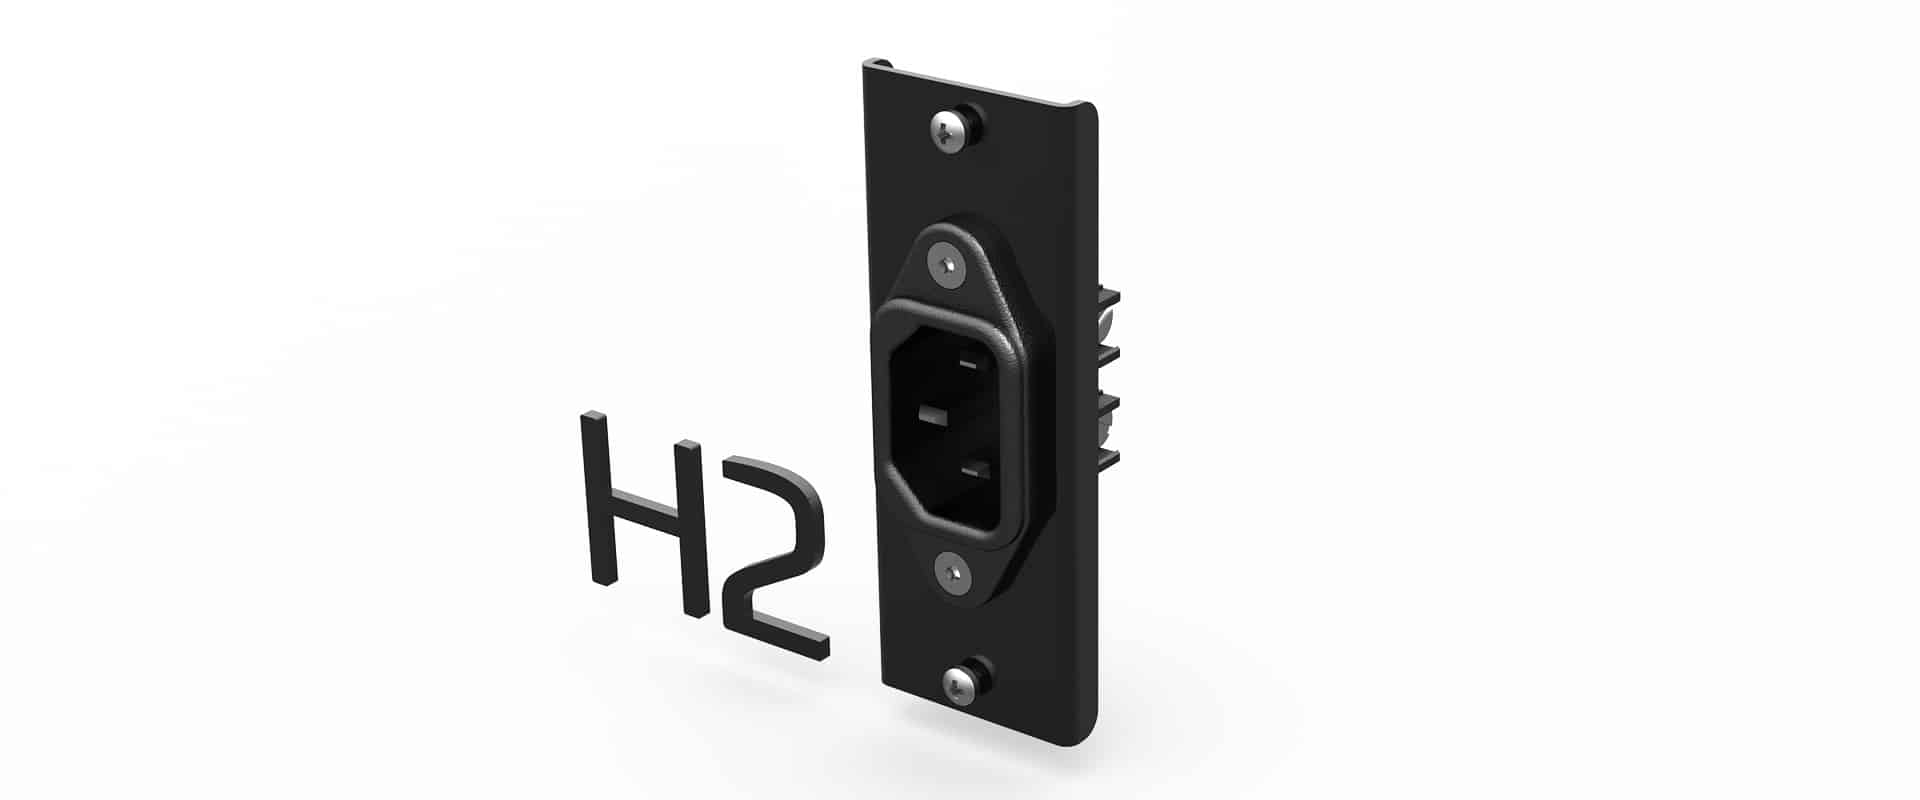 H2 – IEC C14 Connector (Screw Connect)